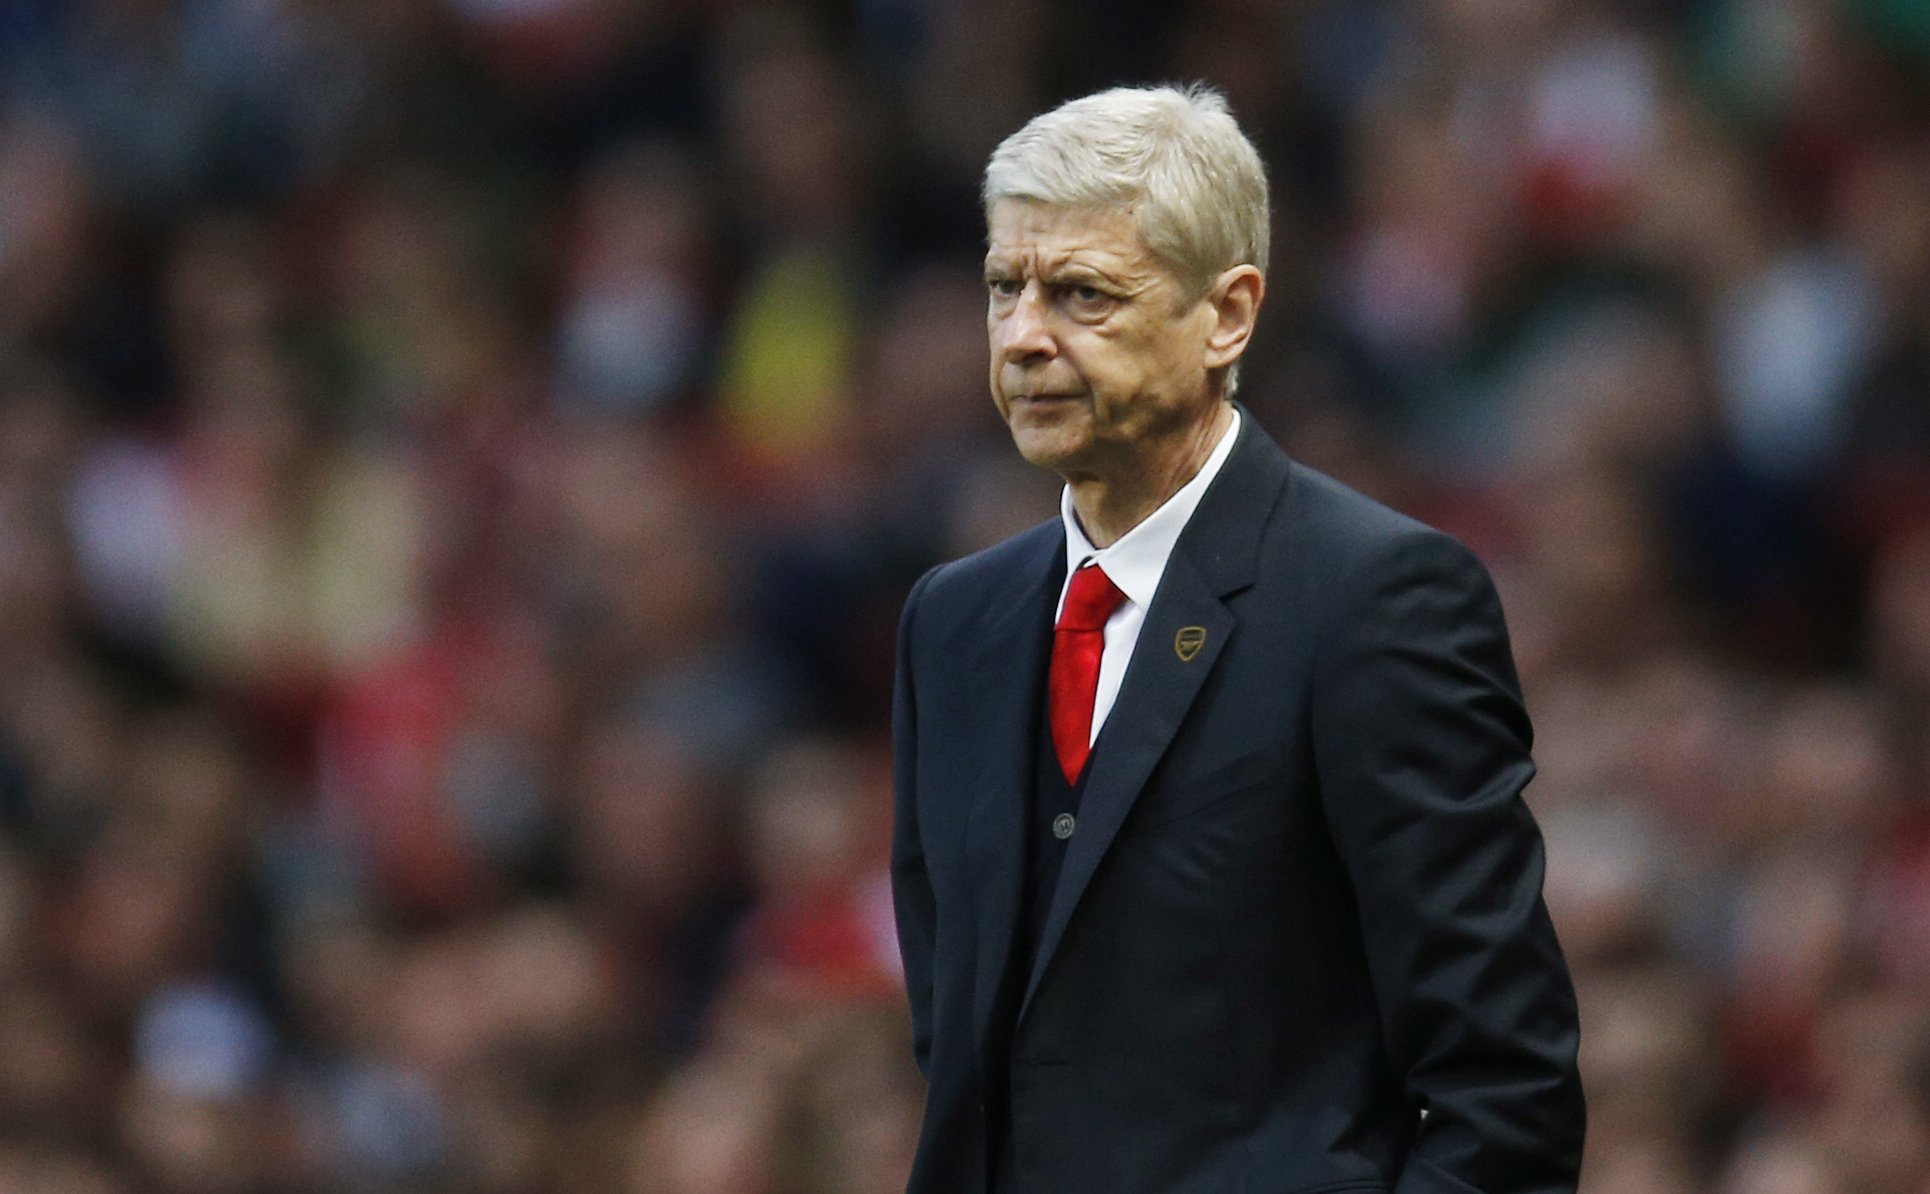 Arsene Wenger was unable to accept defeat gracefully. Photo: Reuters